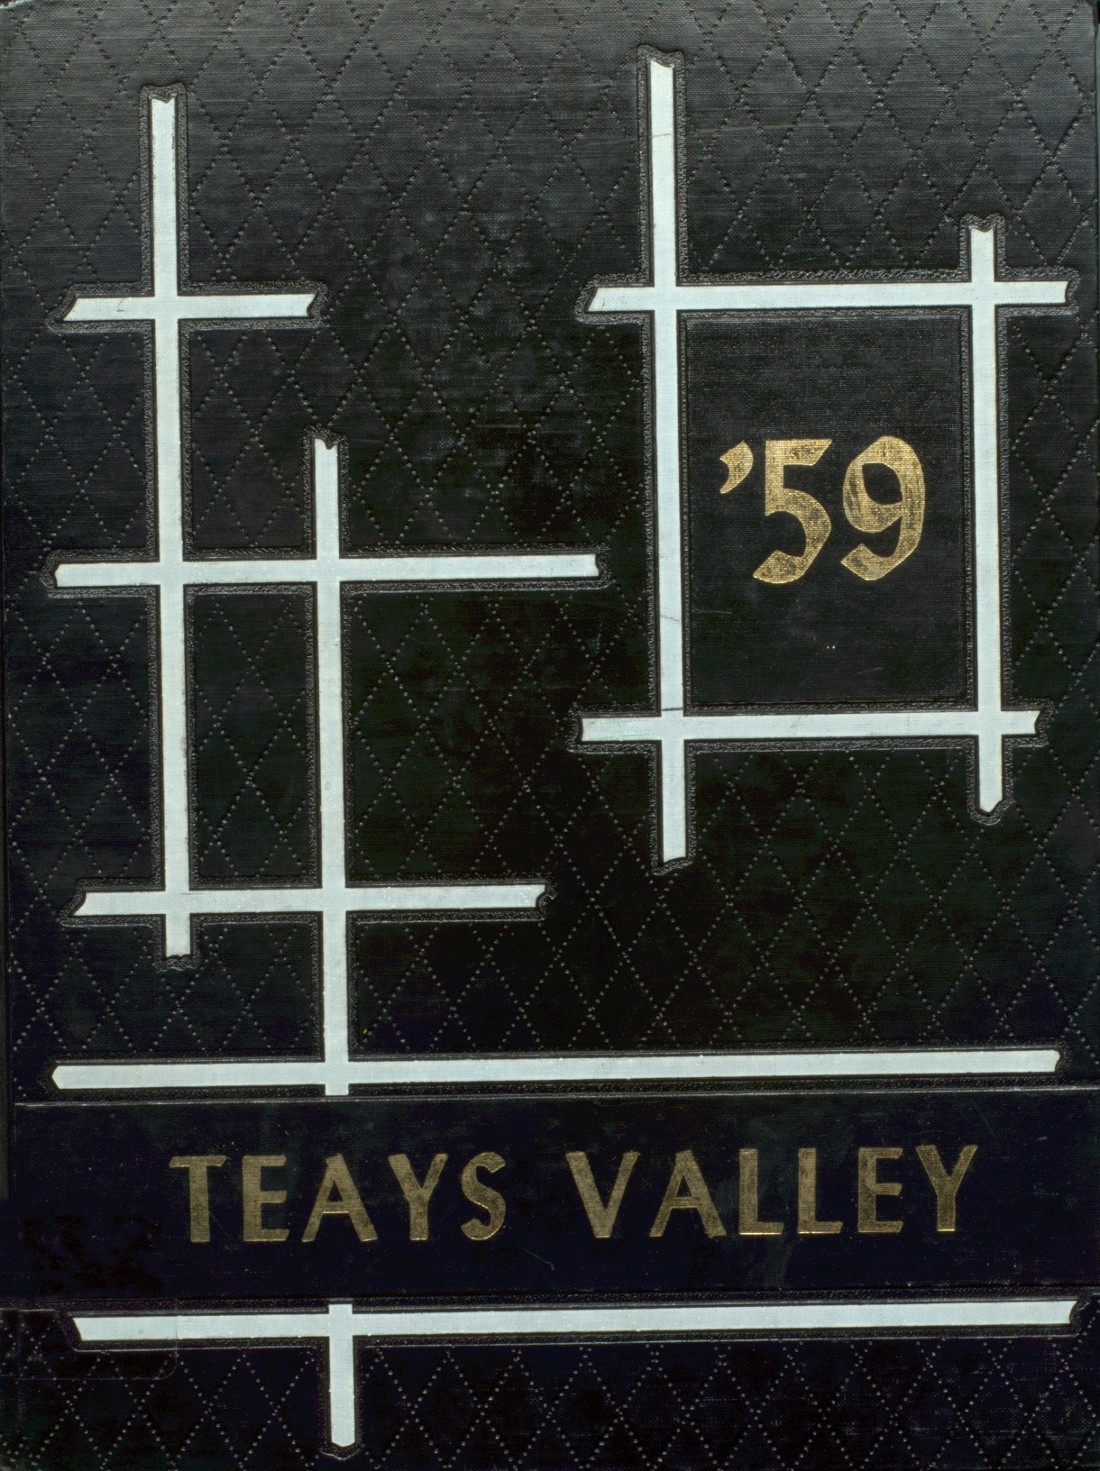 1959-yearbook-from-teays-valley-high-school-from-ashville-ohio